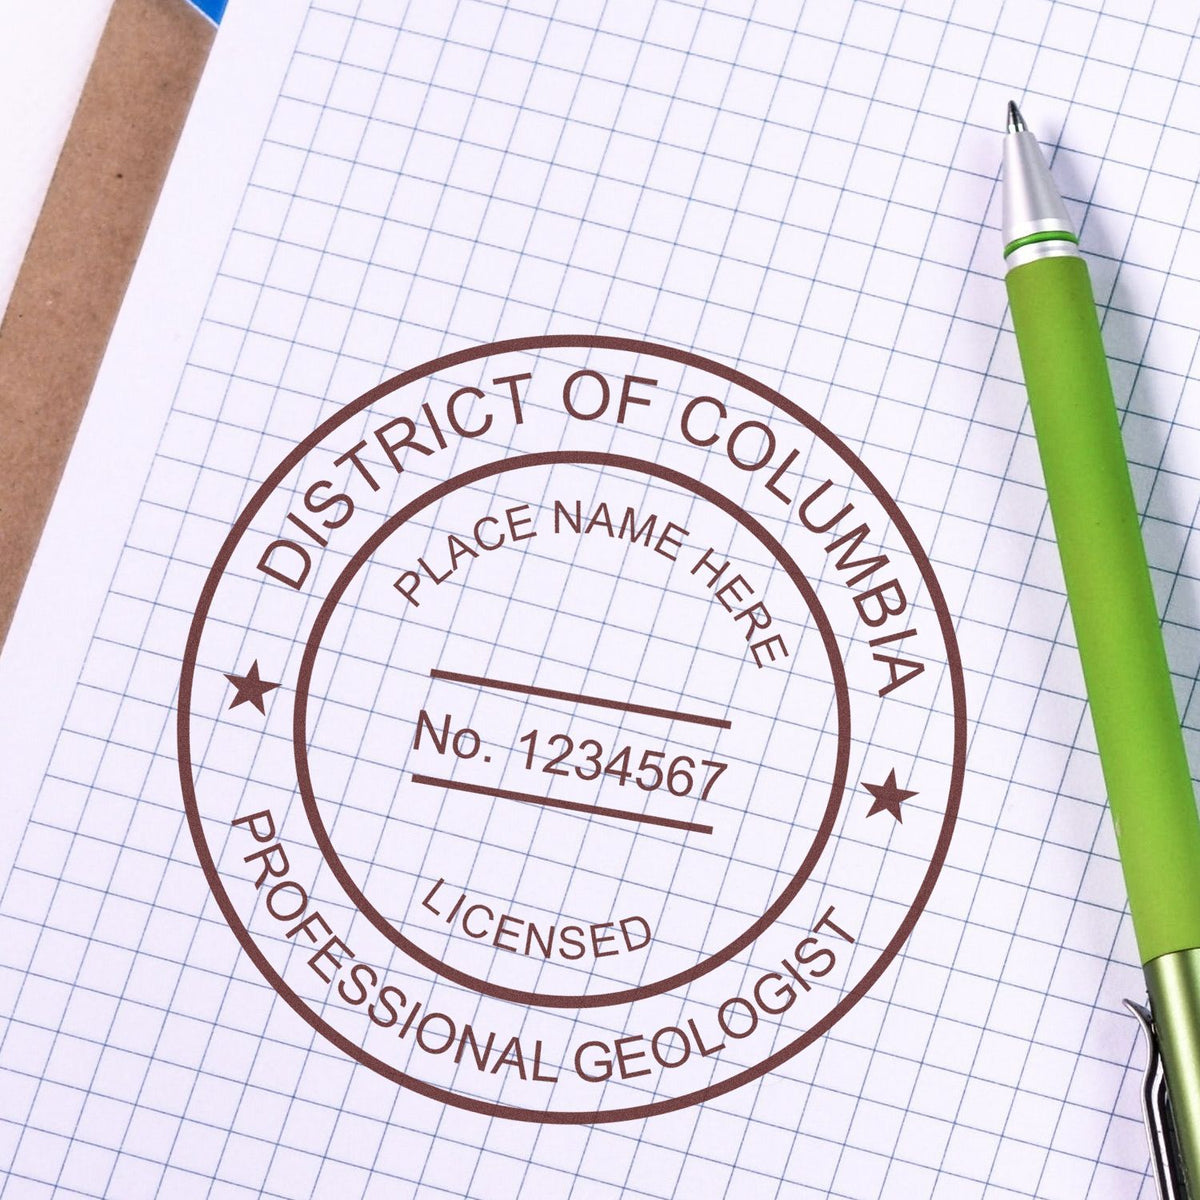 Another Example of a stamped impression of the Slim Pre-Inked District of Columbia Professional Geologist Seal Stamp on a office form